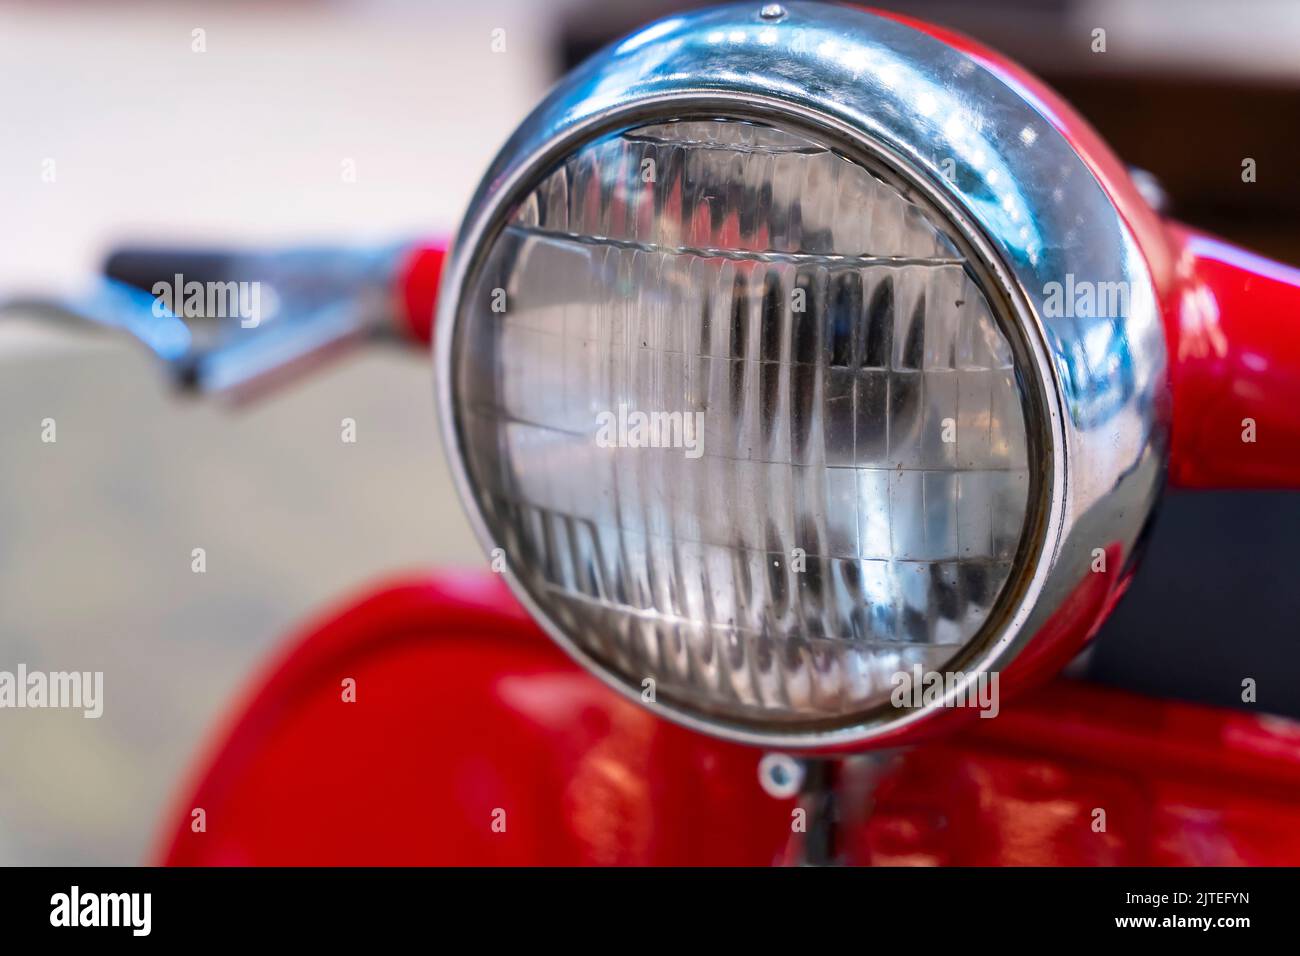 headlight, handlebar and control levers of a vintage red scooter. Stock Photo